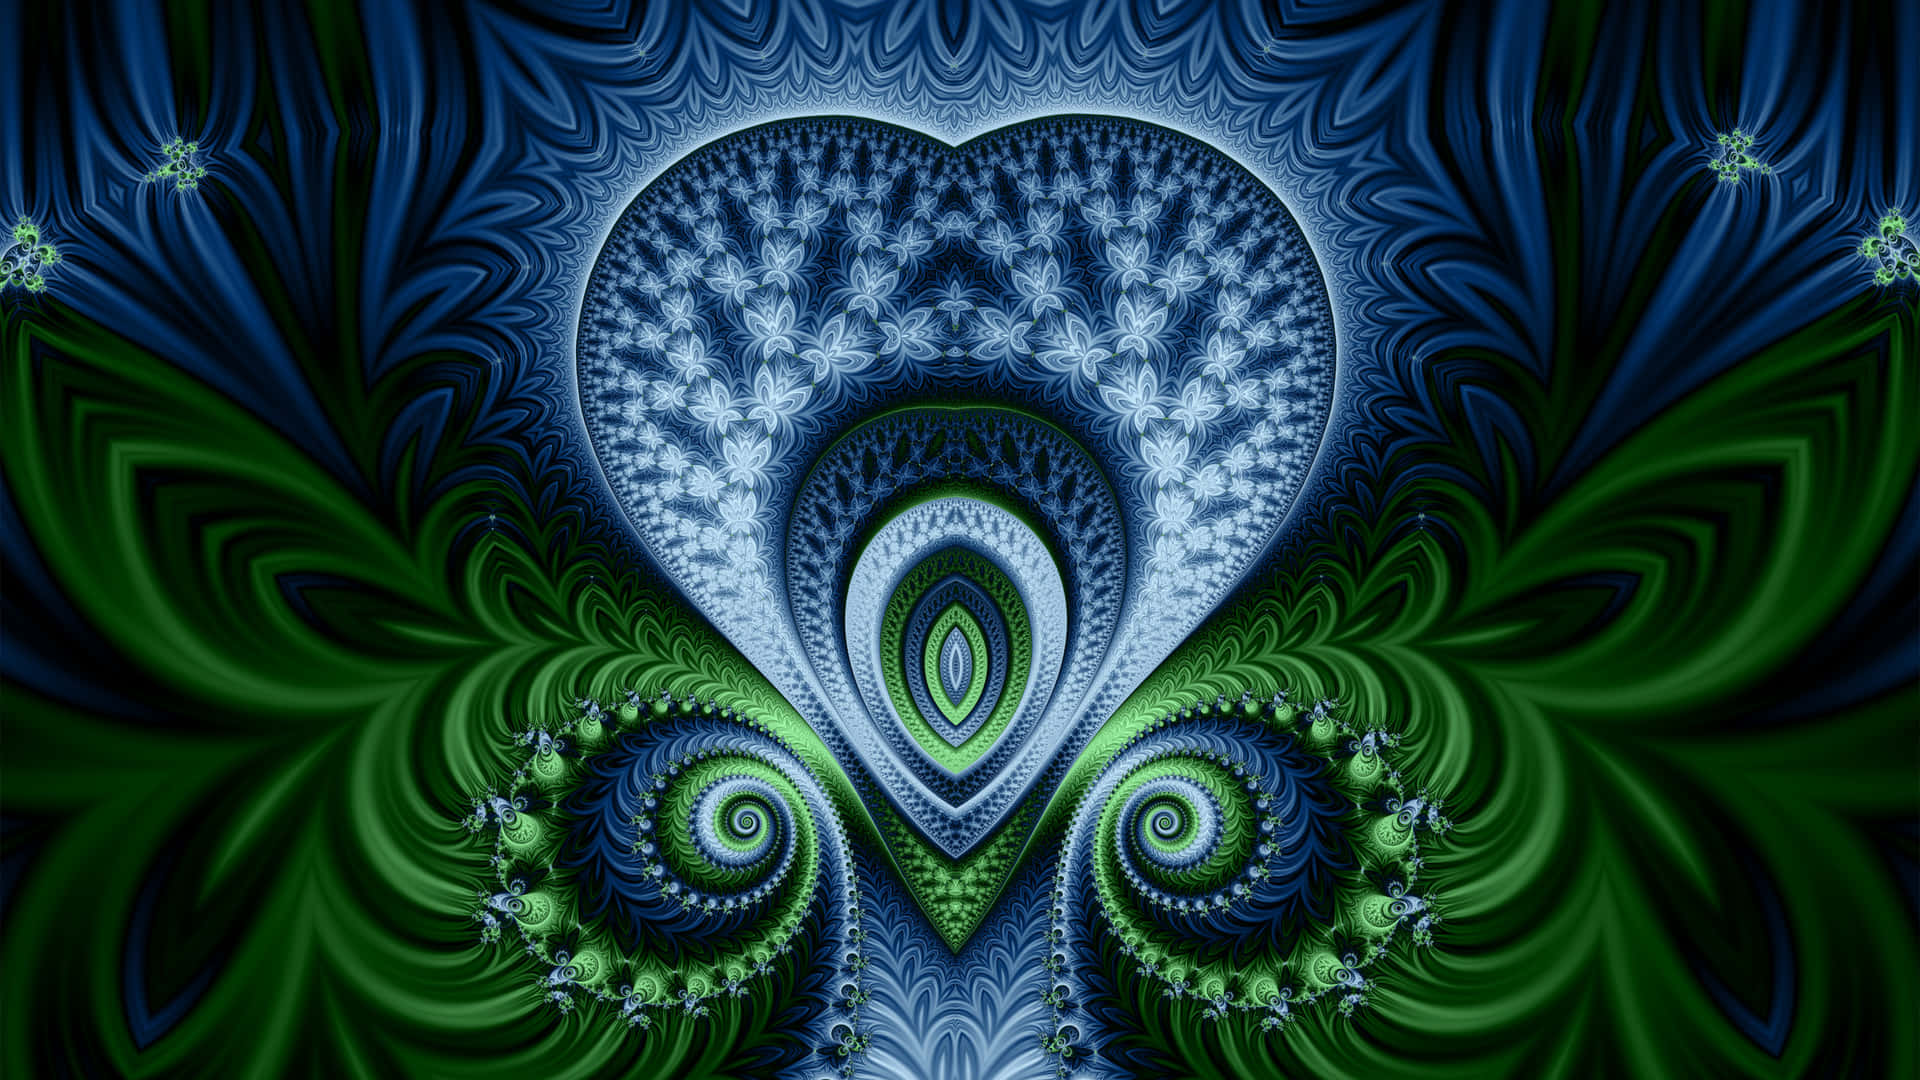 DMT, A substance that expands consciousness and explores the magic of existence Wallpaper